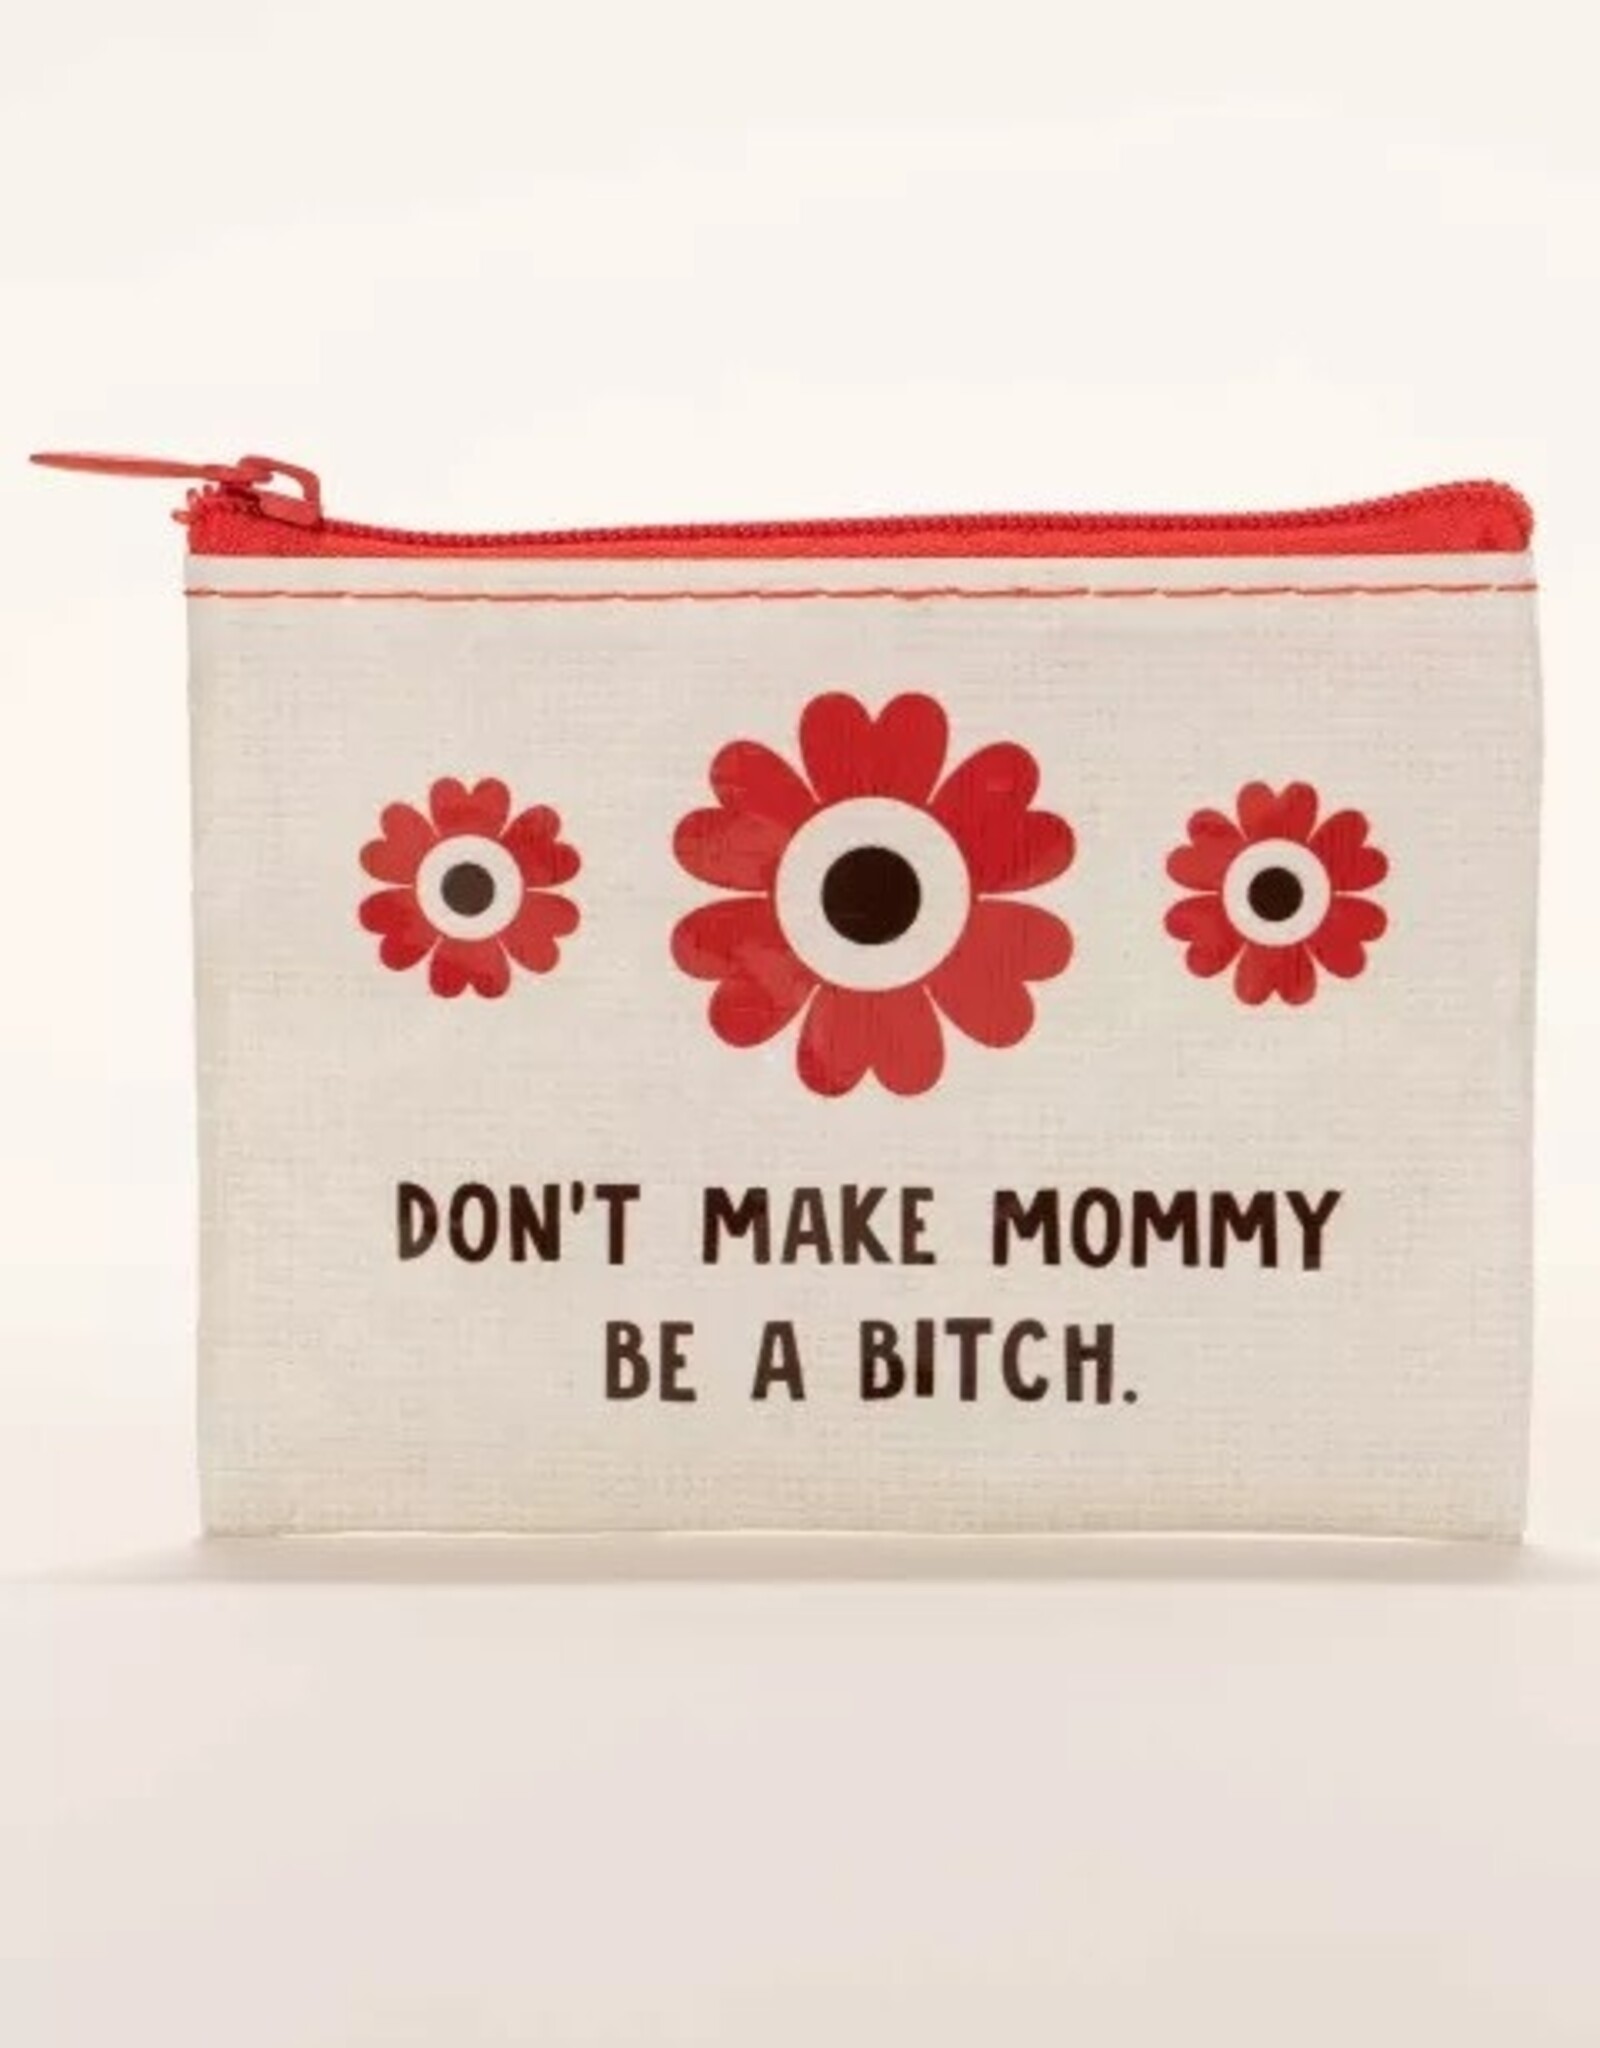 Don't Make Mommy Coin Purse